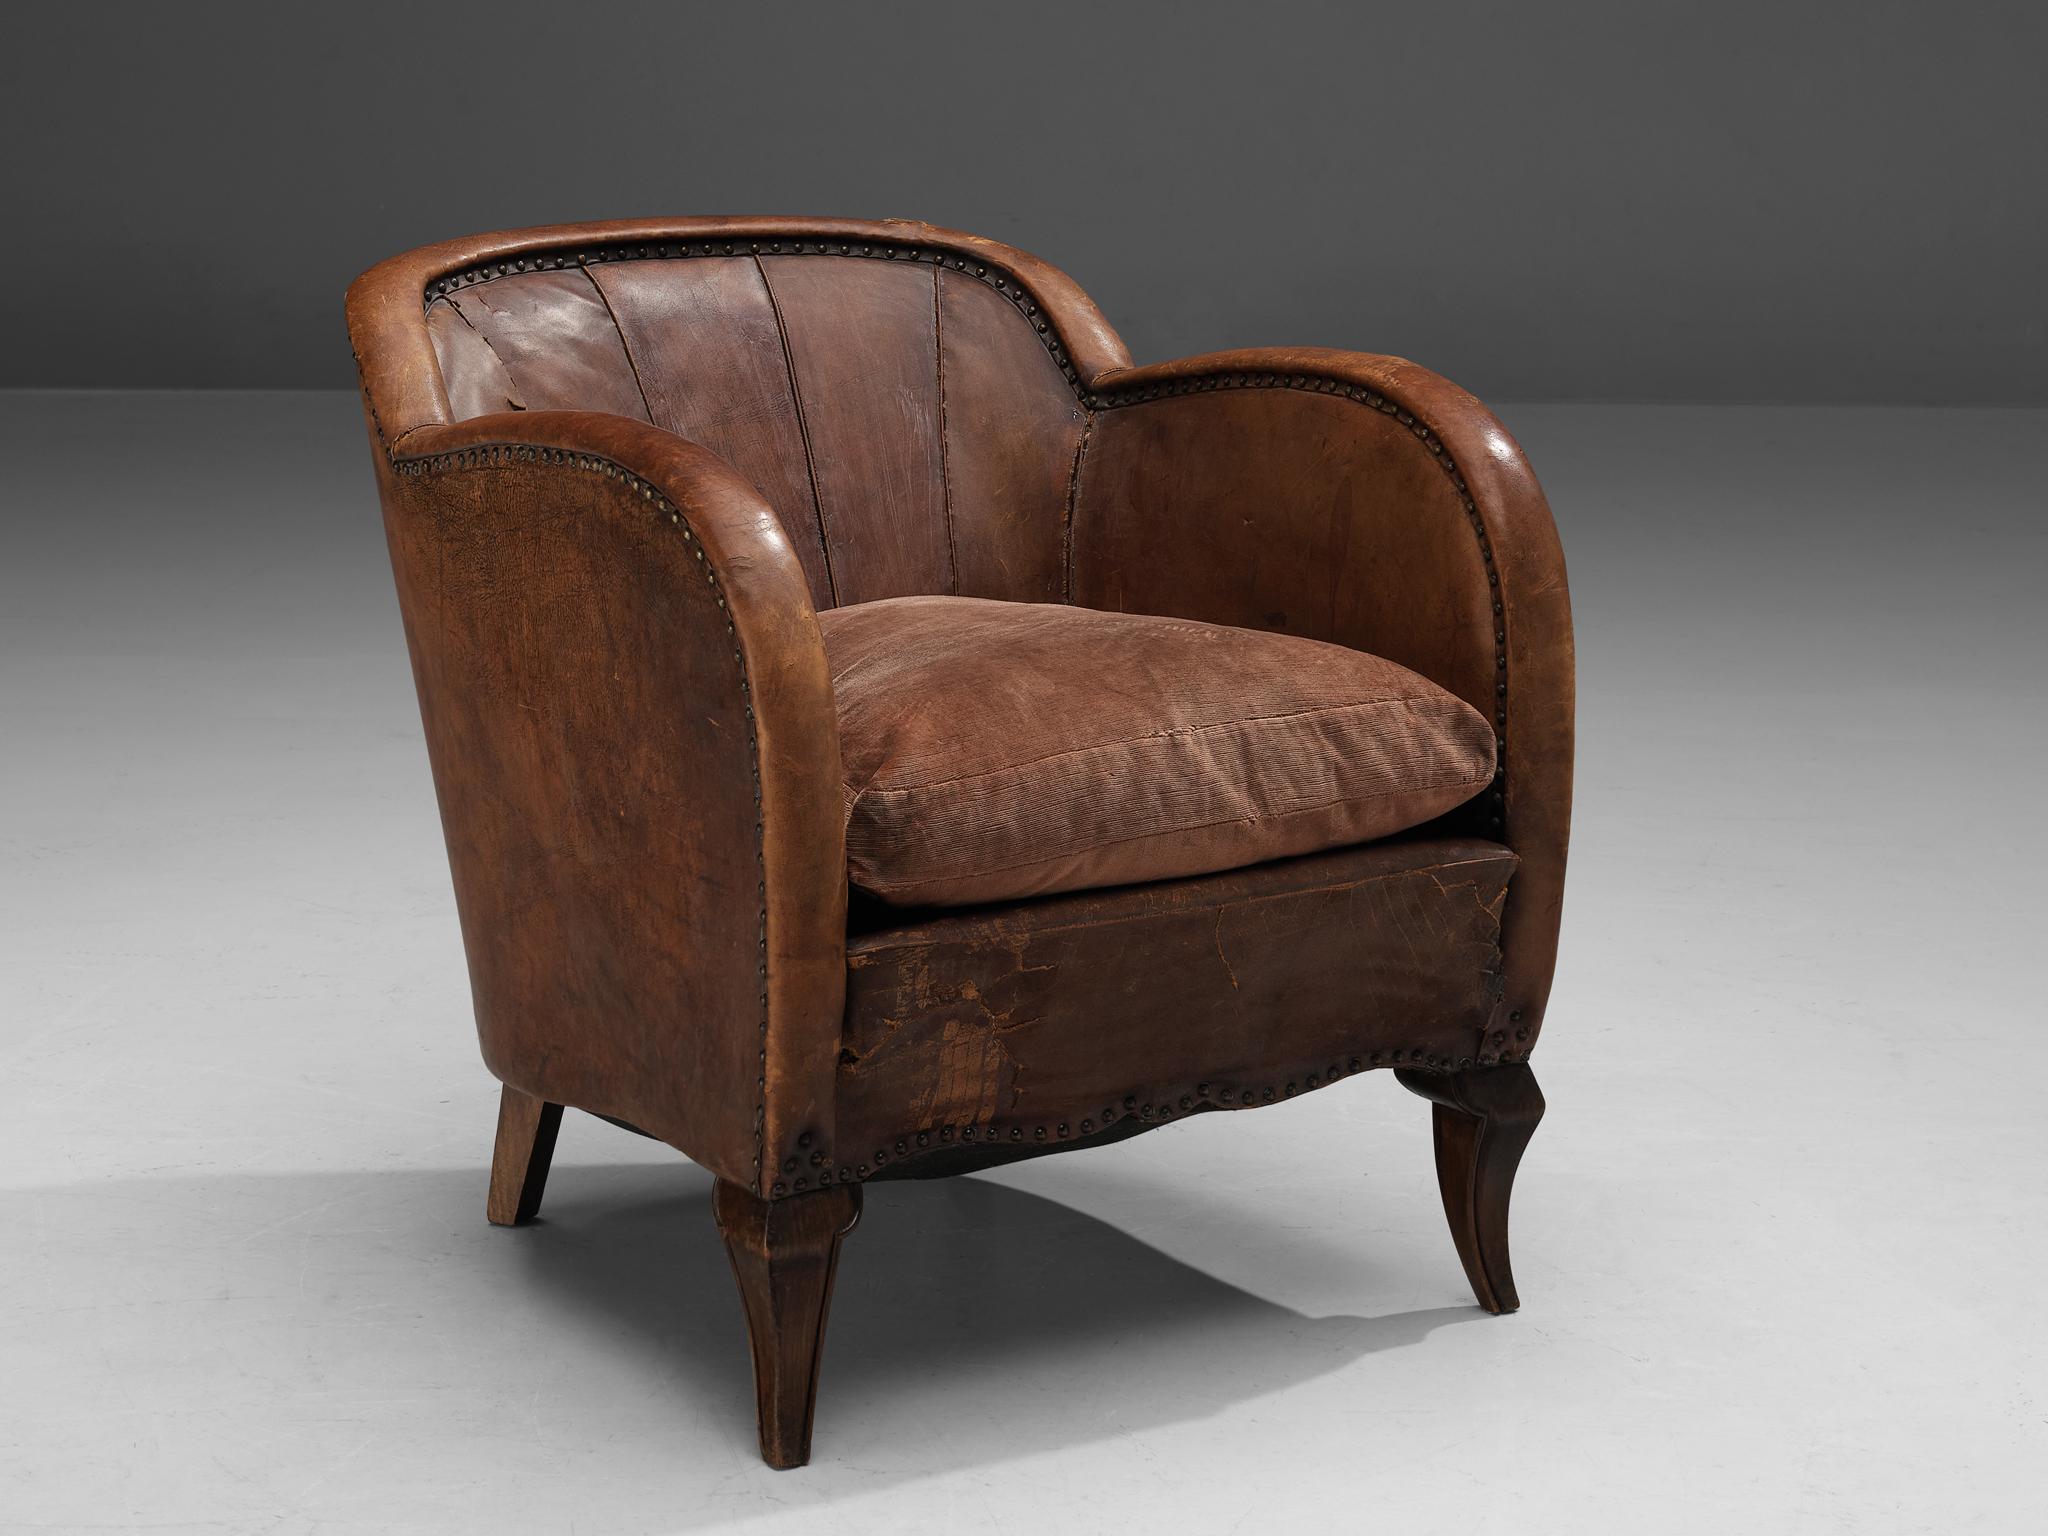 Lounge chair, leather, wood, Scandinavia, 1940s. 

Grand Scandinavian club chair in patinated cognac leather made by an unknown cabinetmaker. The wooden front legs are carved in an elegant cabriole design that suits perfectly with the rounded